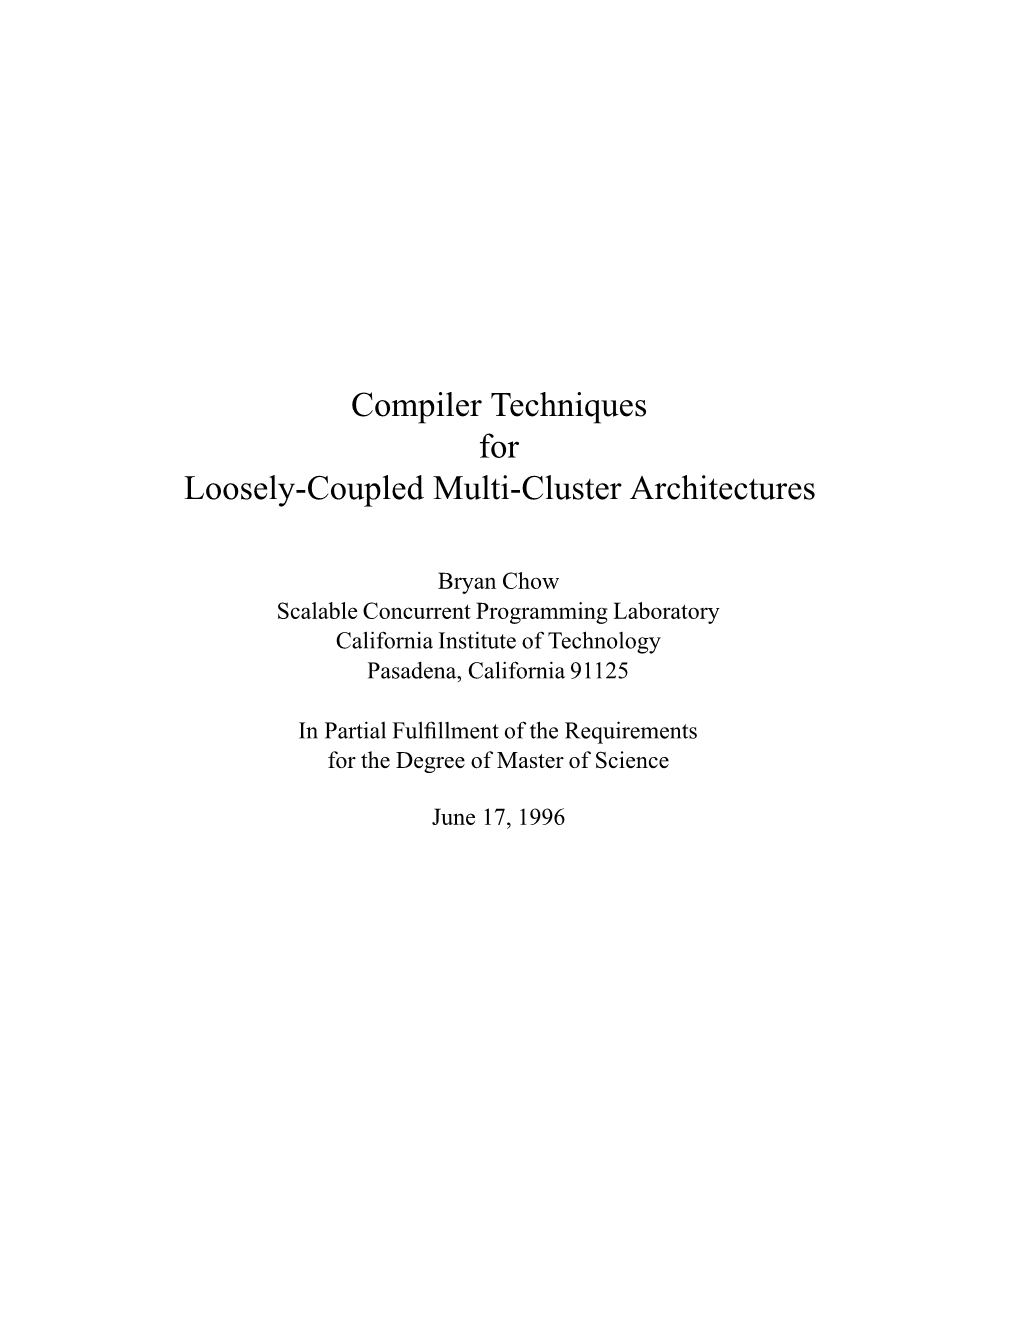 Compiler Techniques for Loosely-Coupled Multi-Cluster Architectures